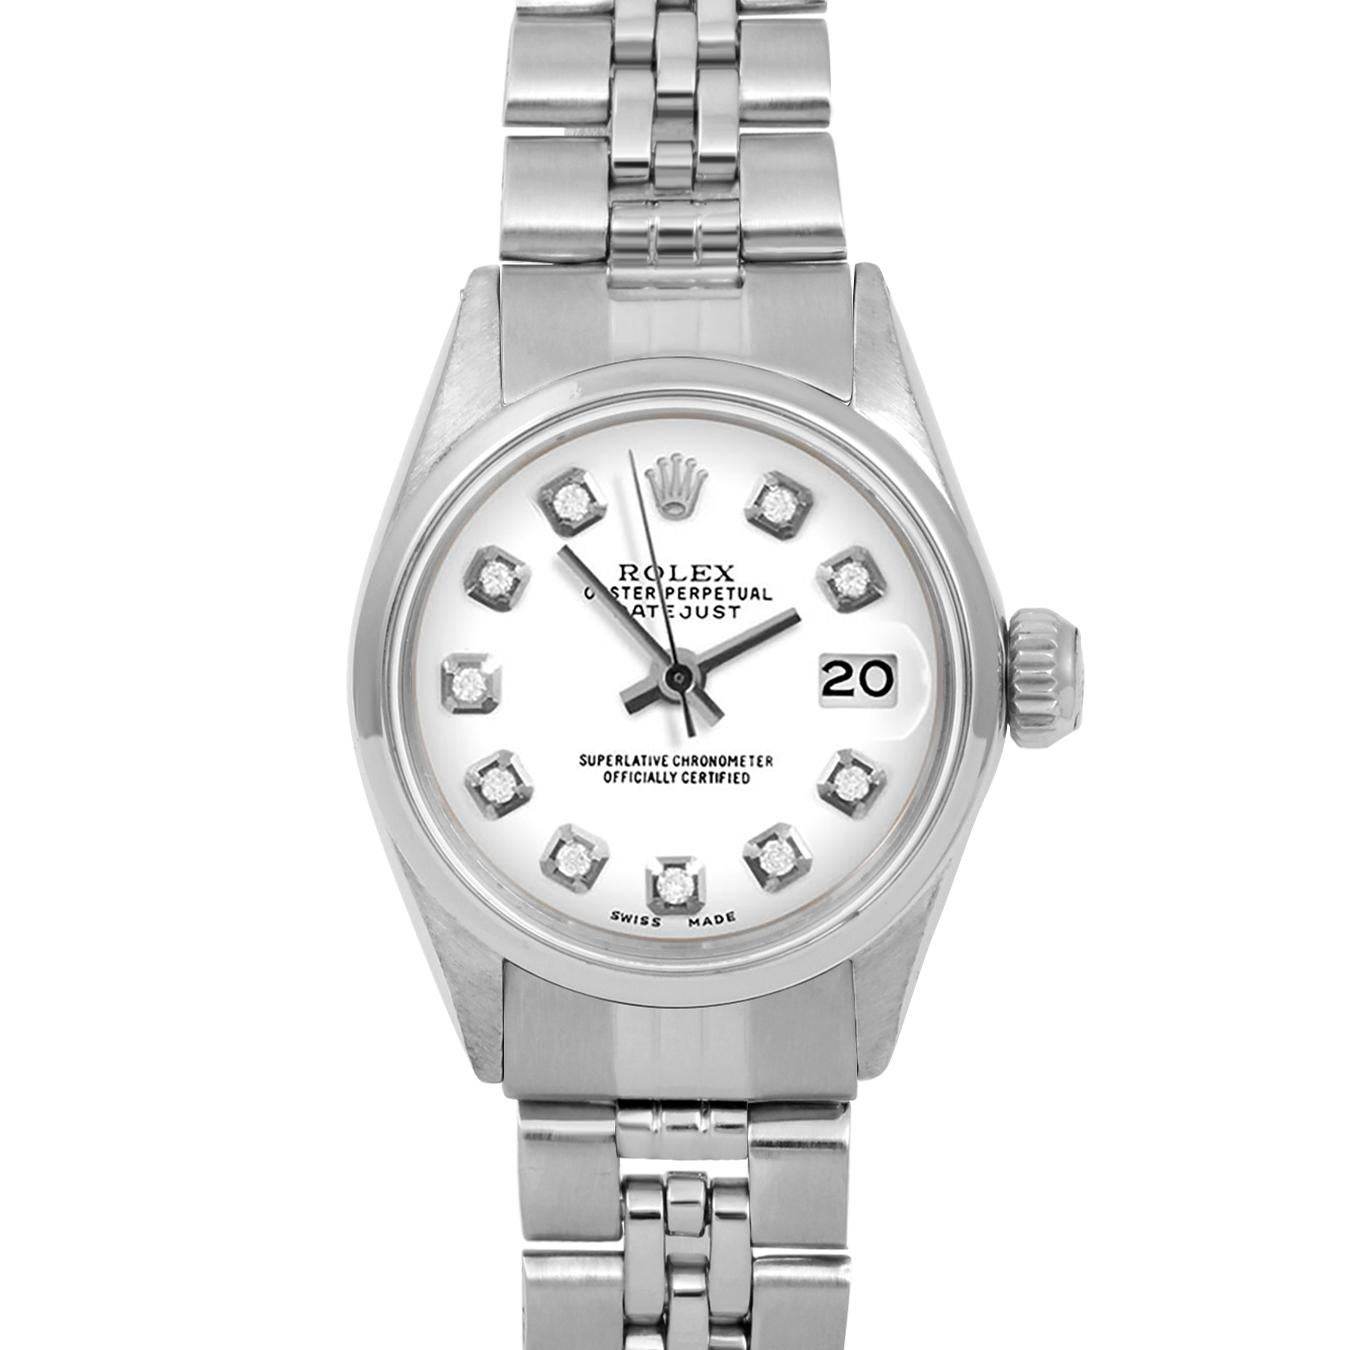 Brand : Rolex
Model : Datejust (Non-Quickset Model)
Gender : Ladies
Metals : Stainless Steel
Case Size : 24 mm

Dial : Custom White Diamond Dial (This dial is not original Rolex And has been added aftermarket yet is a beautiful Custom